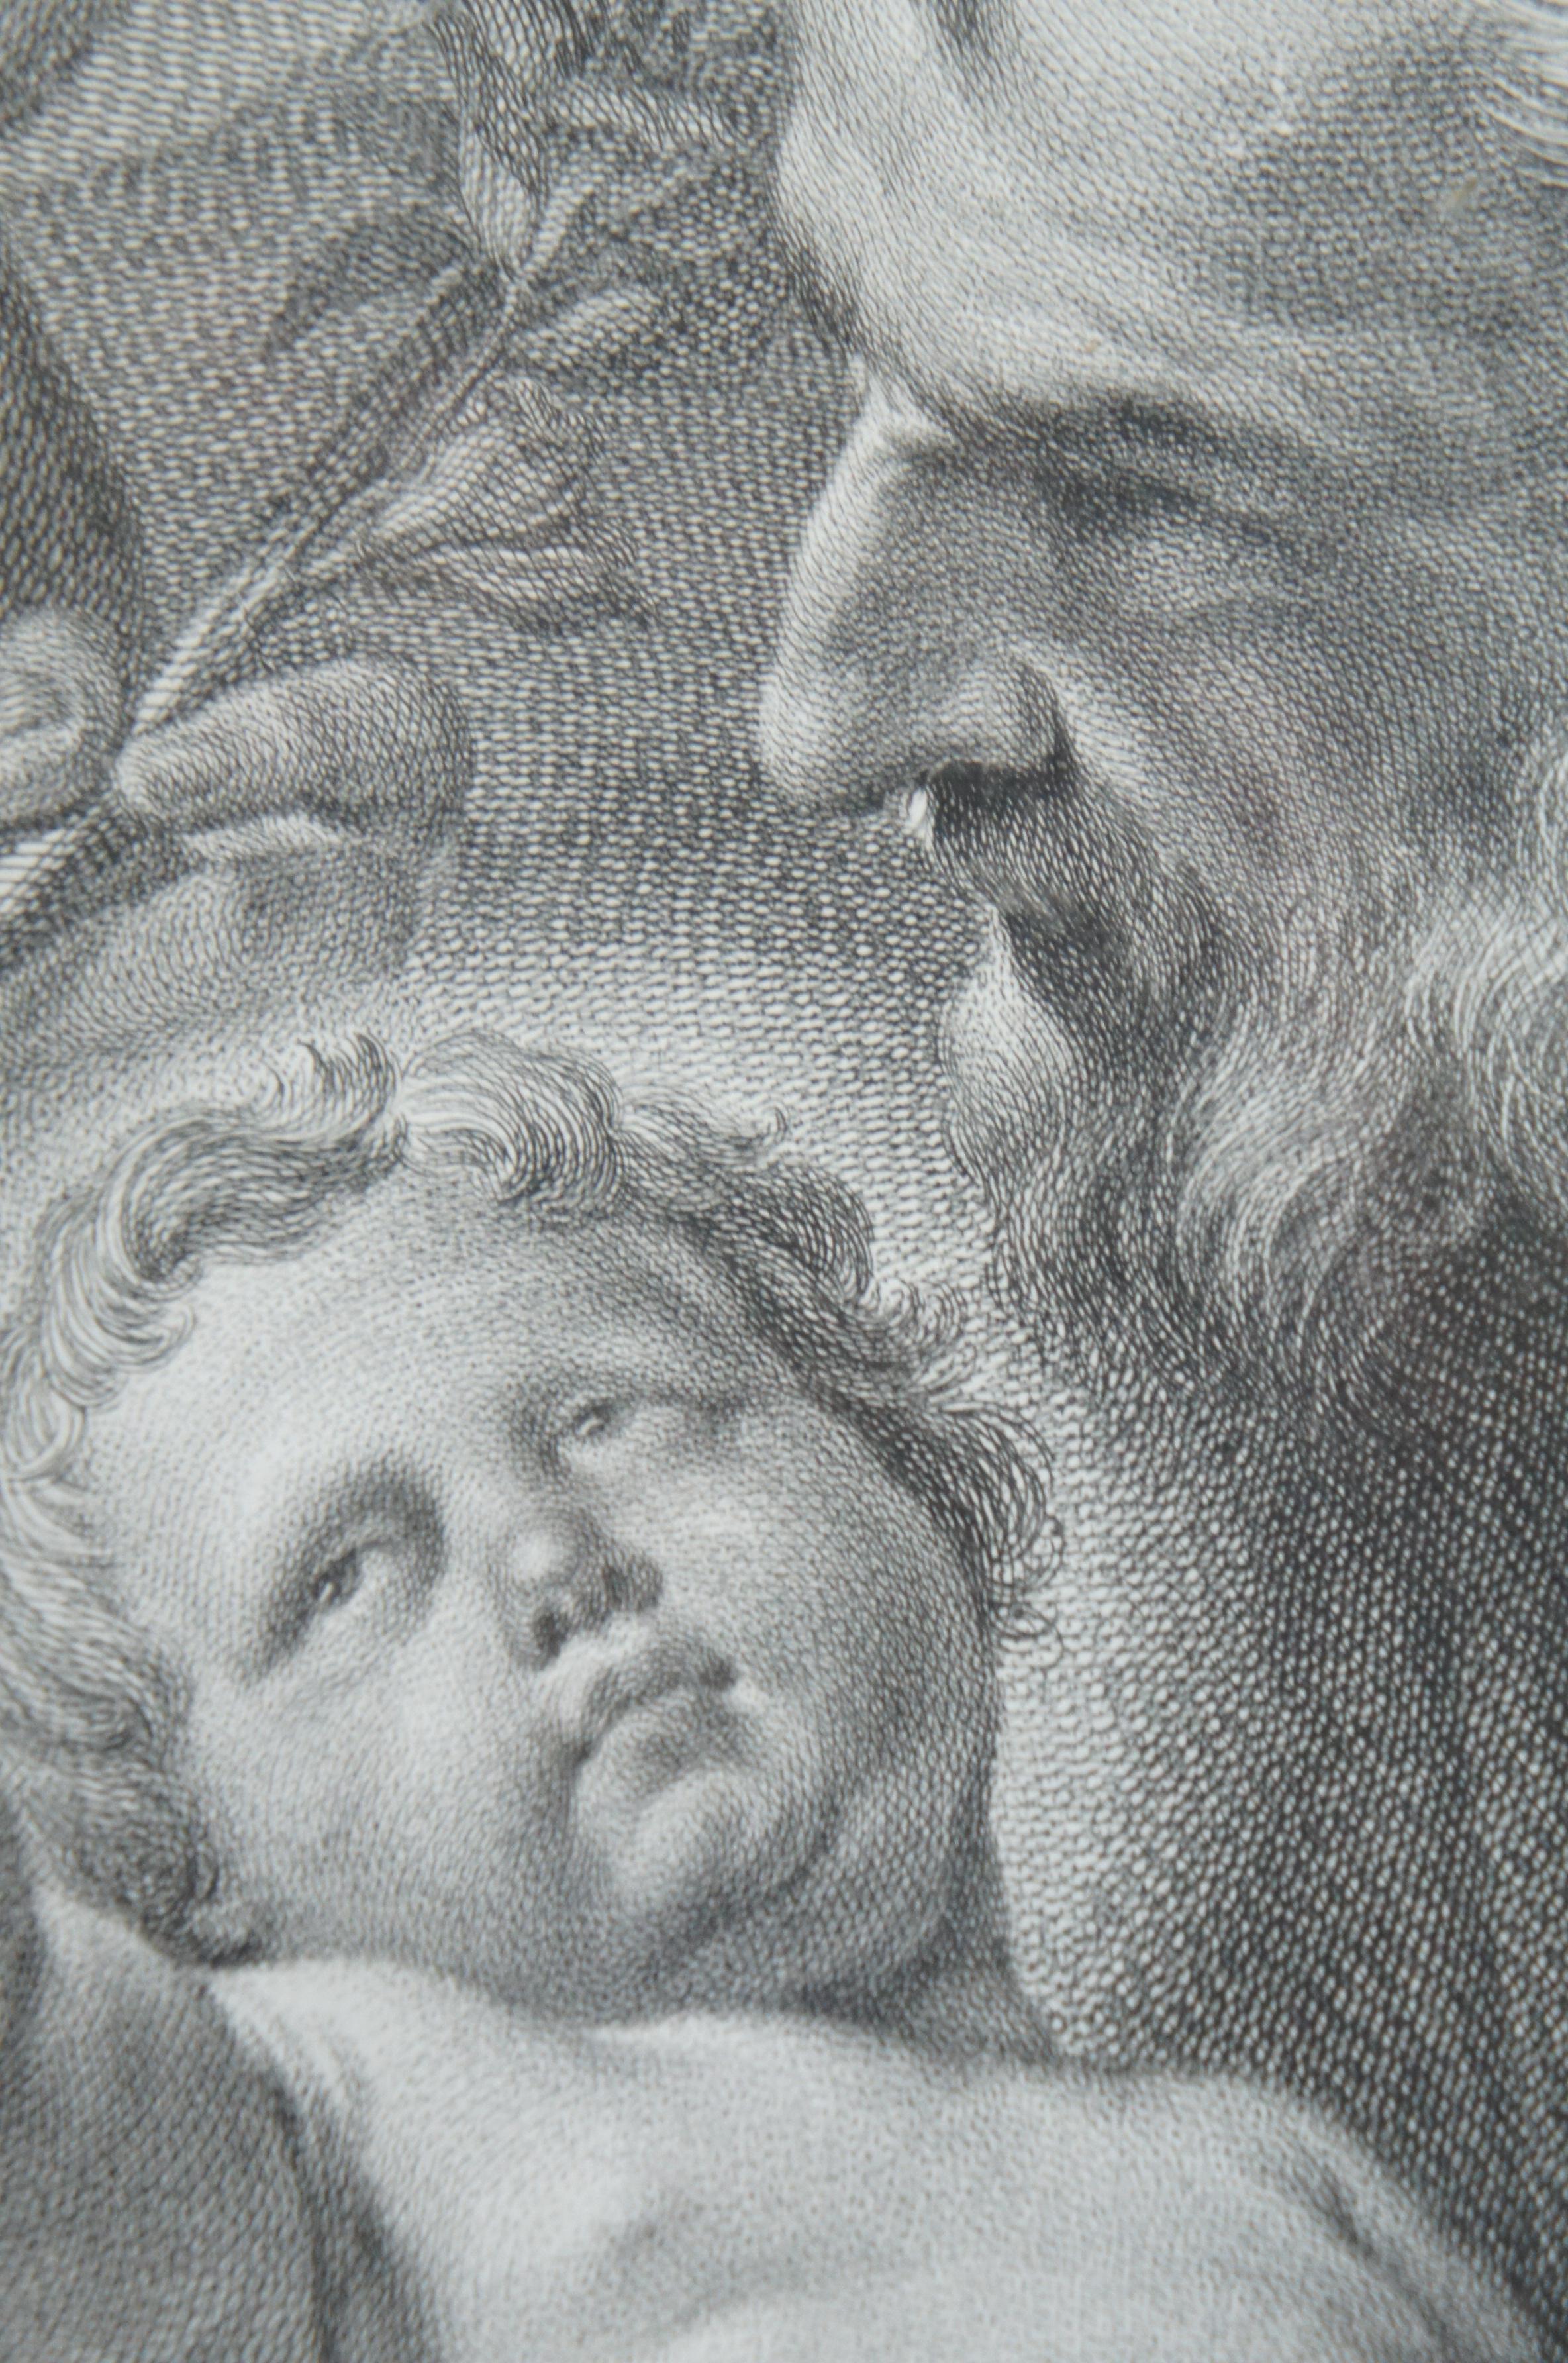 18th Century Holy Family Engraving Mathias Oesterreich After Carlo Lotti Framed For Sale 5